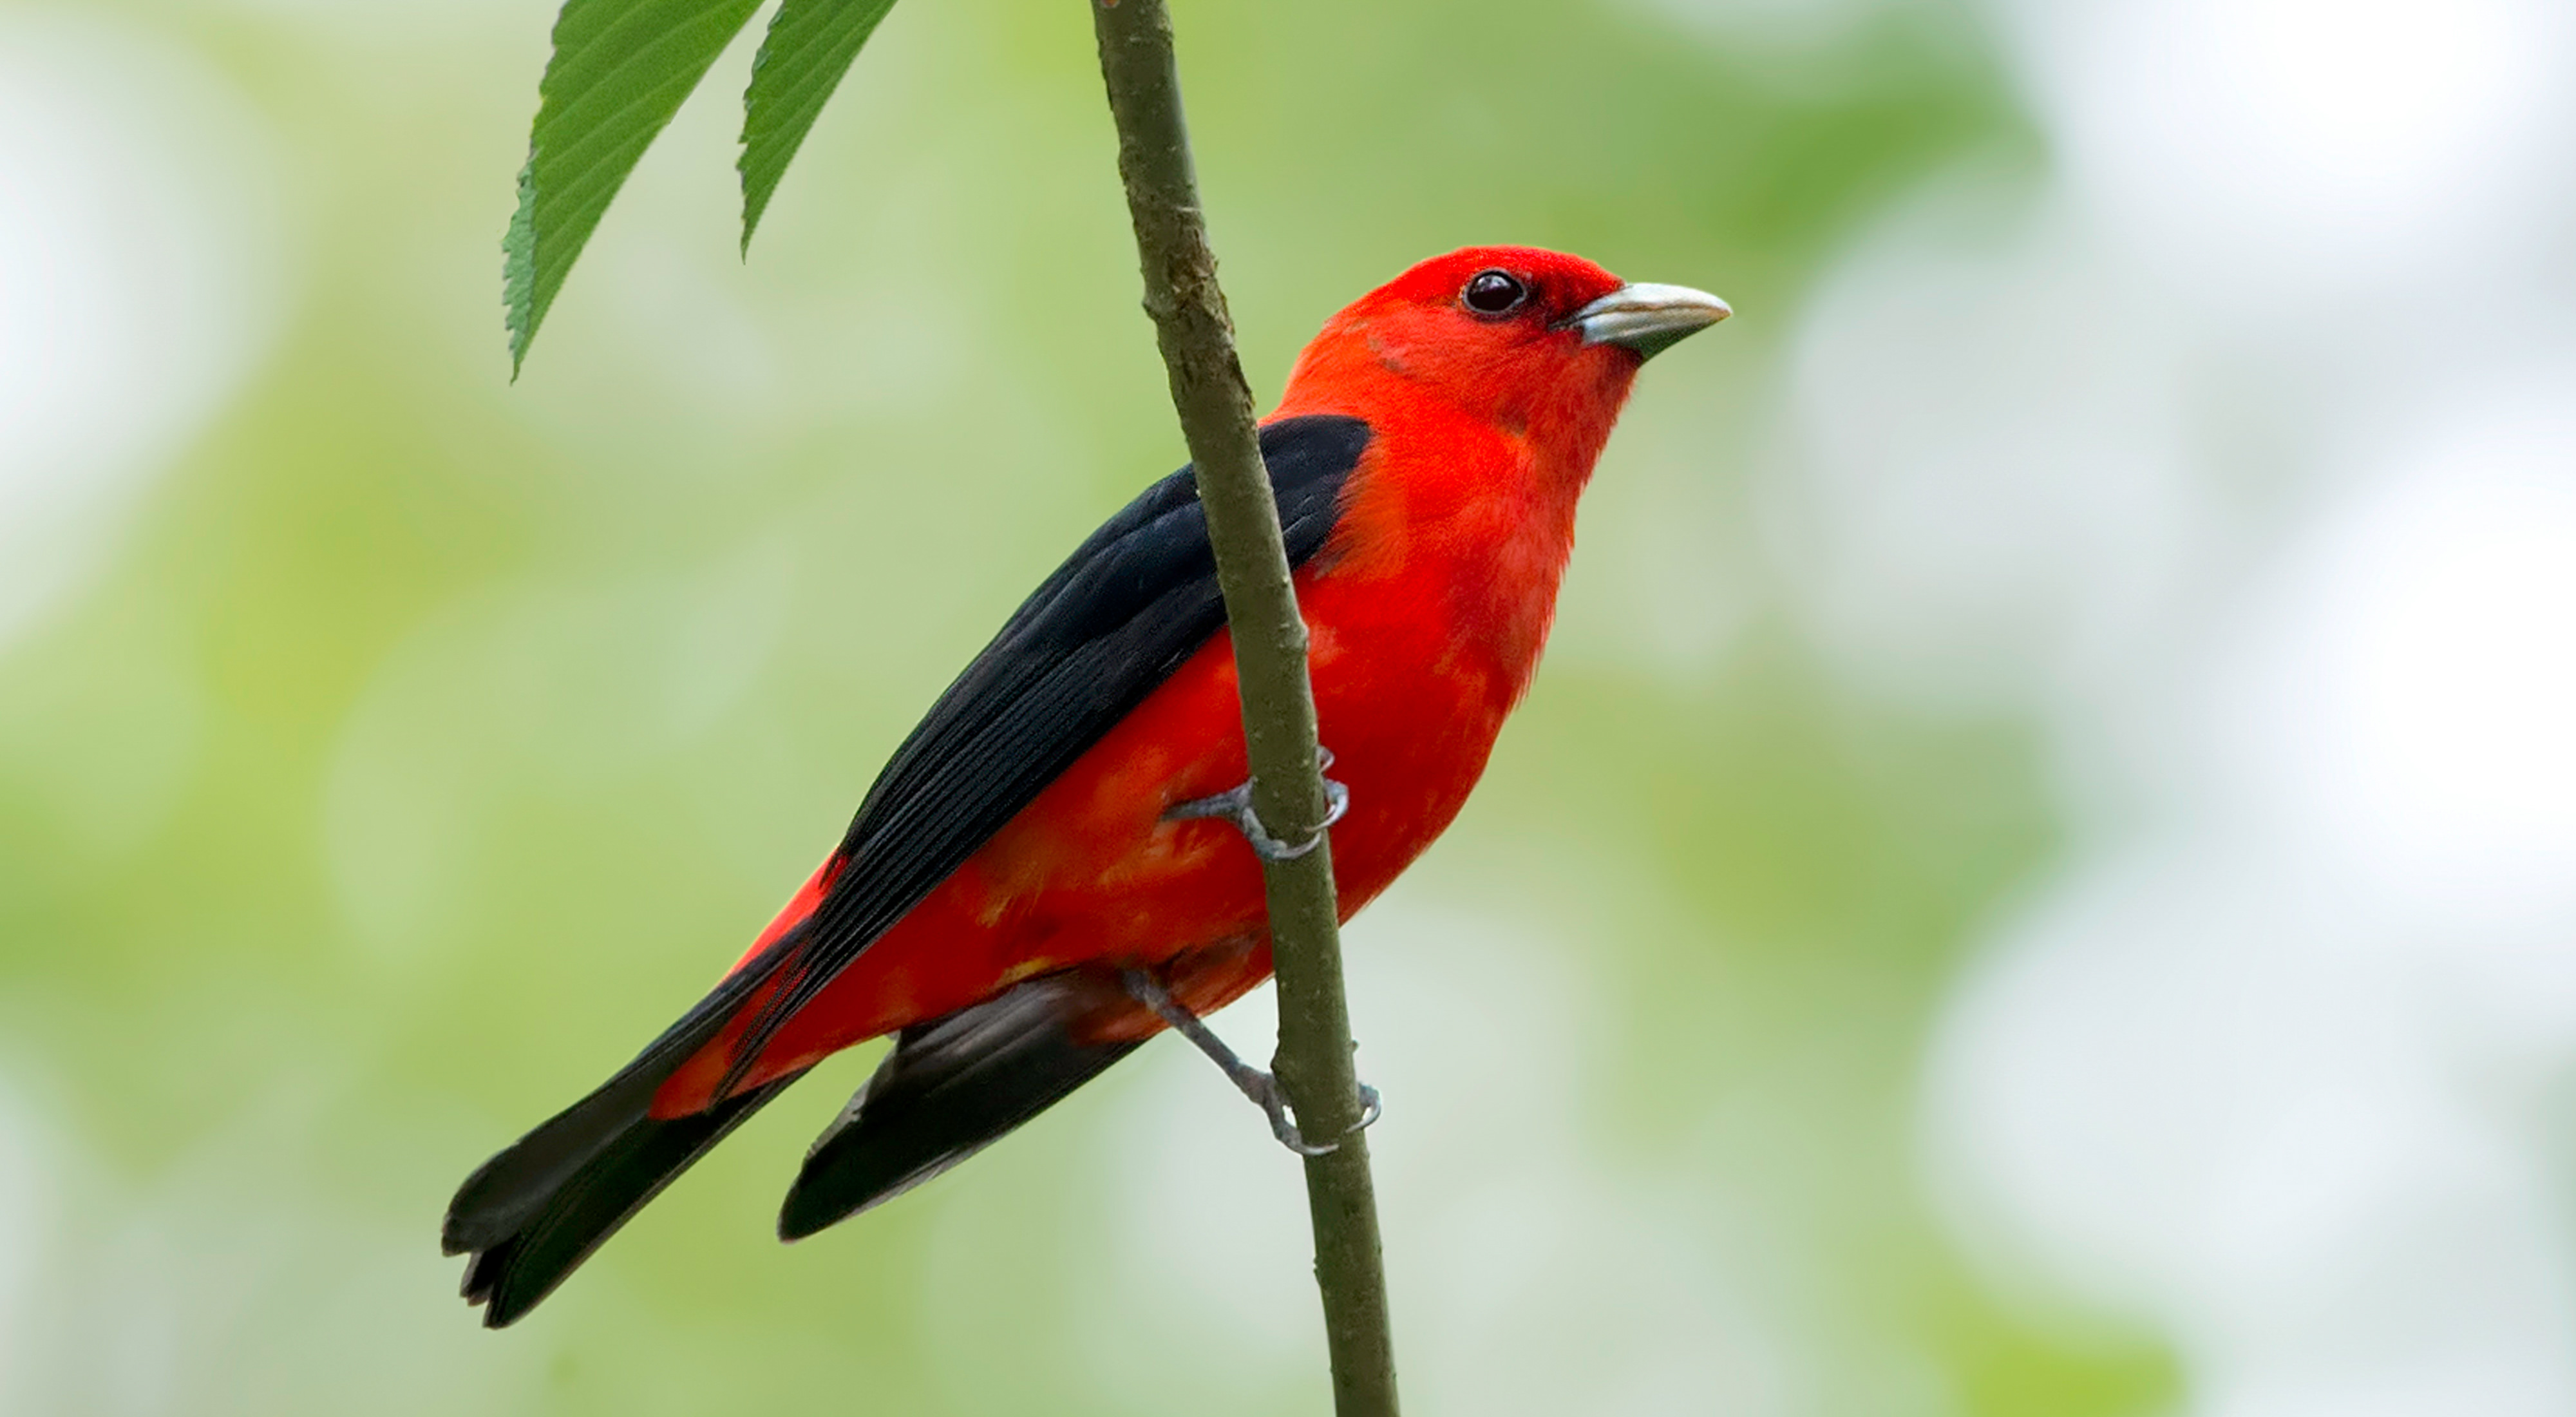 A bright red bird with black wings perches on a branch.